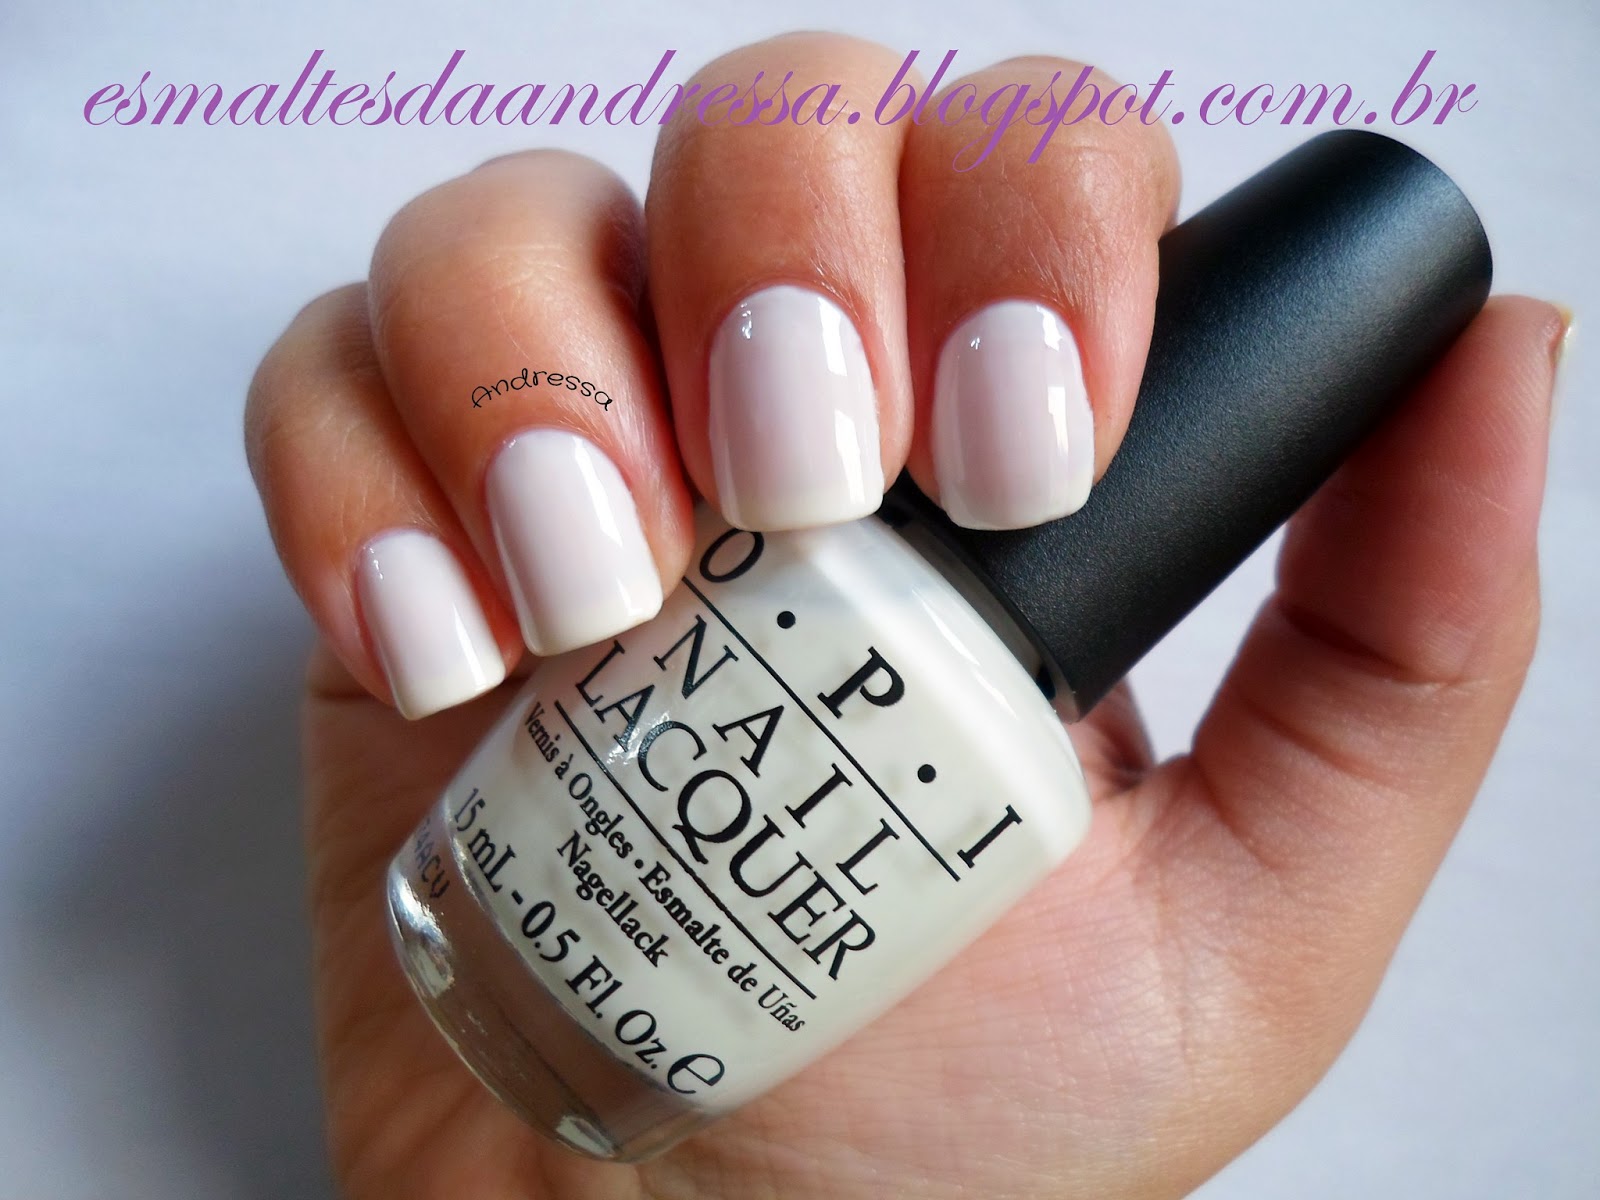 8. OPI GelColor in "Funny Bunny" - wide 3